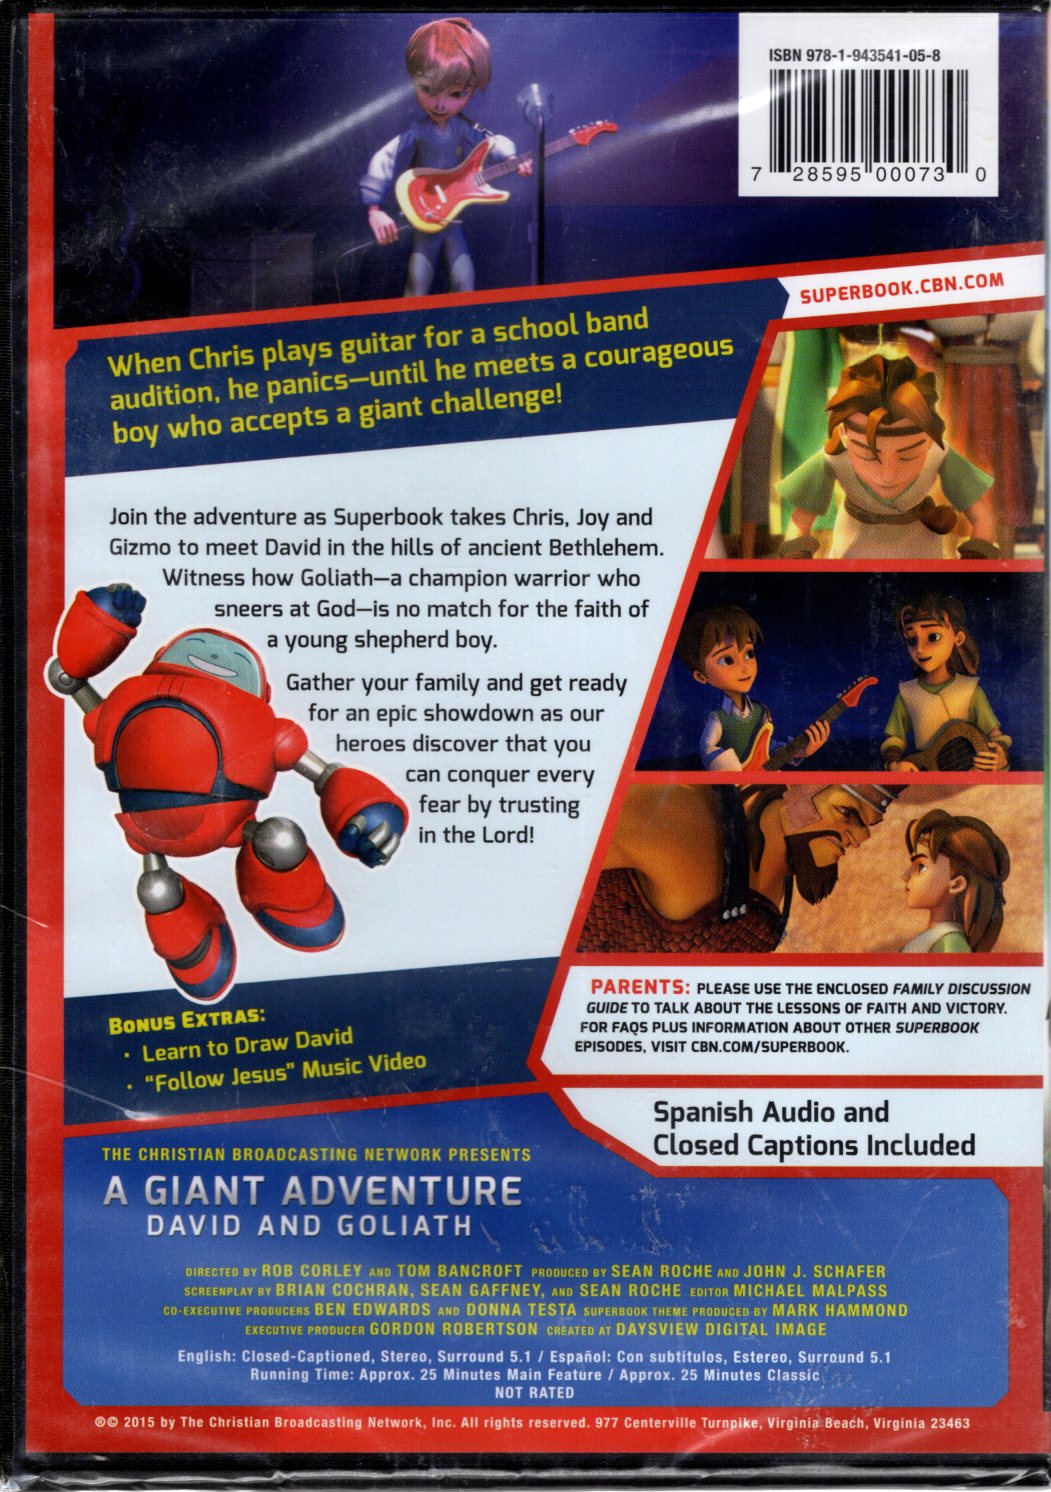 Christian Broadcasting Network - Superbook: A Giant Adventure, David and Goliath - DVD